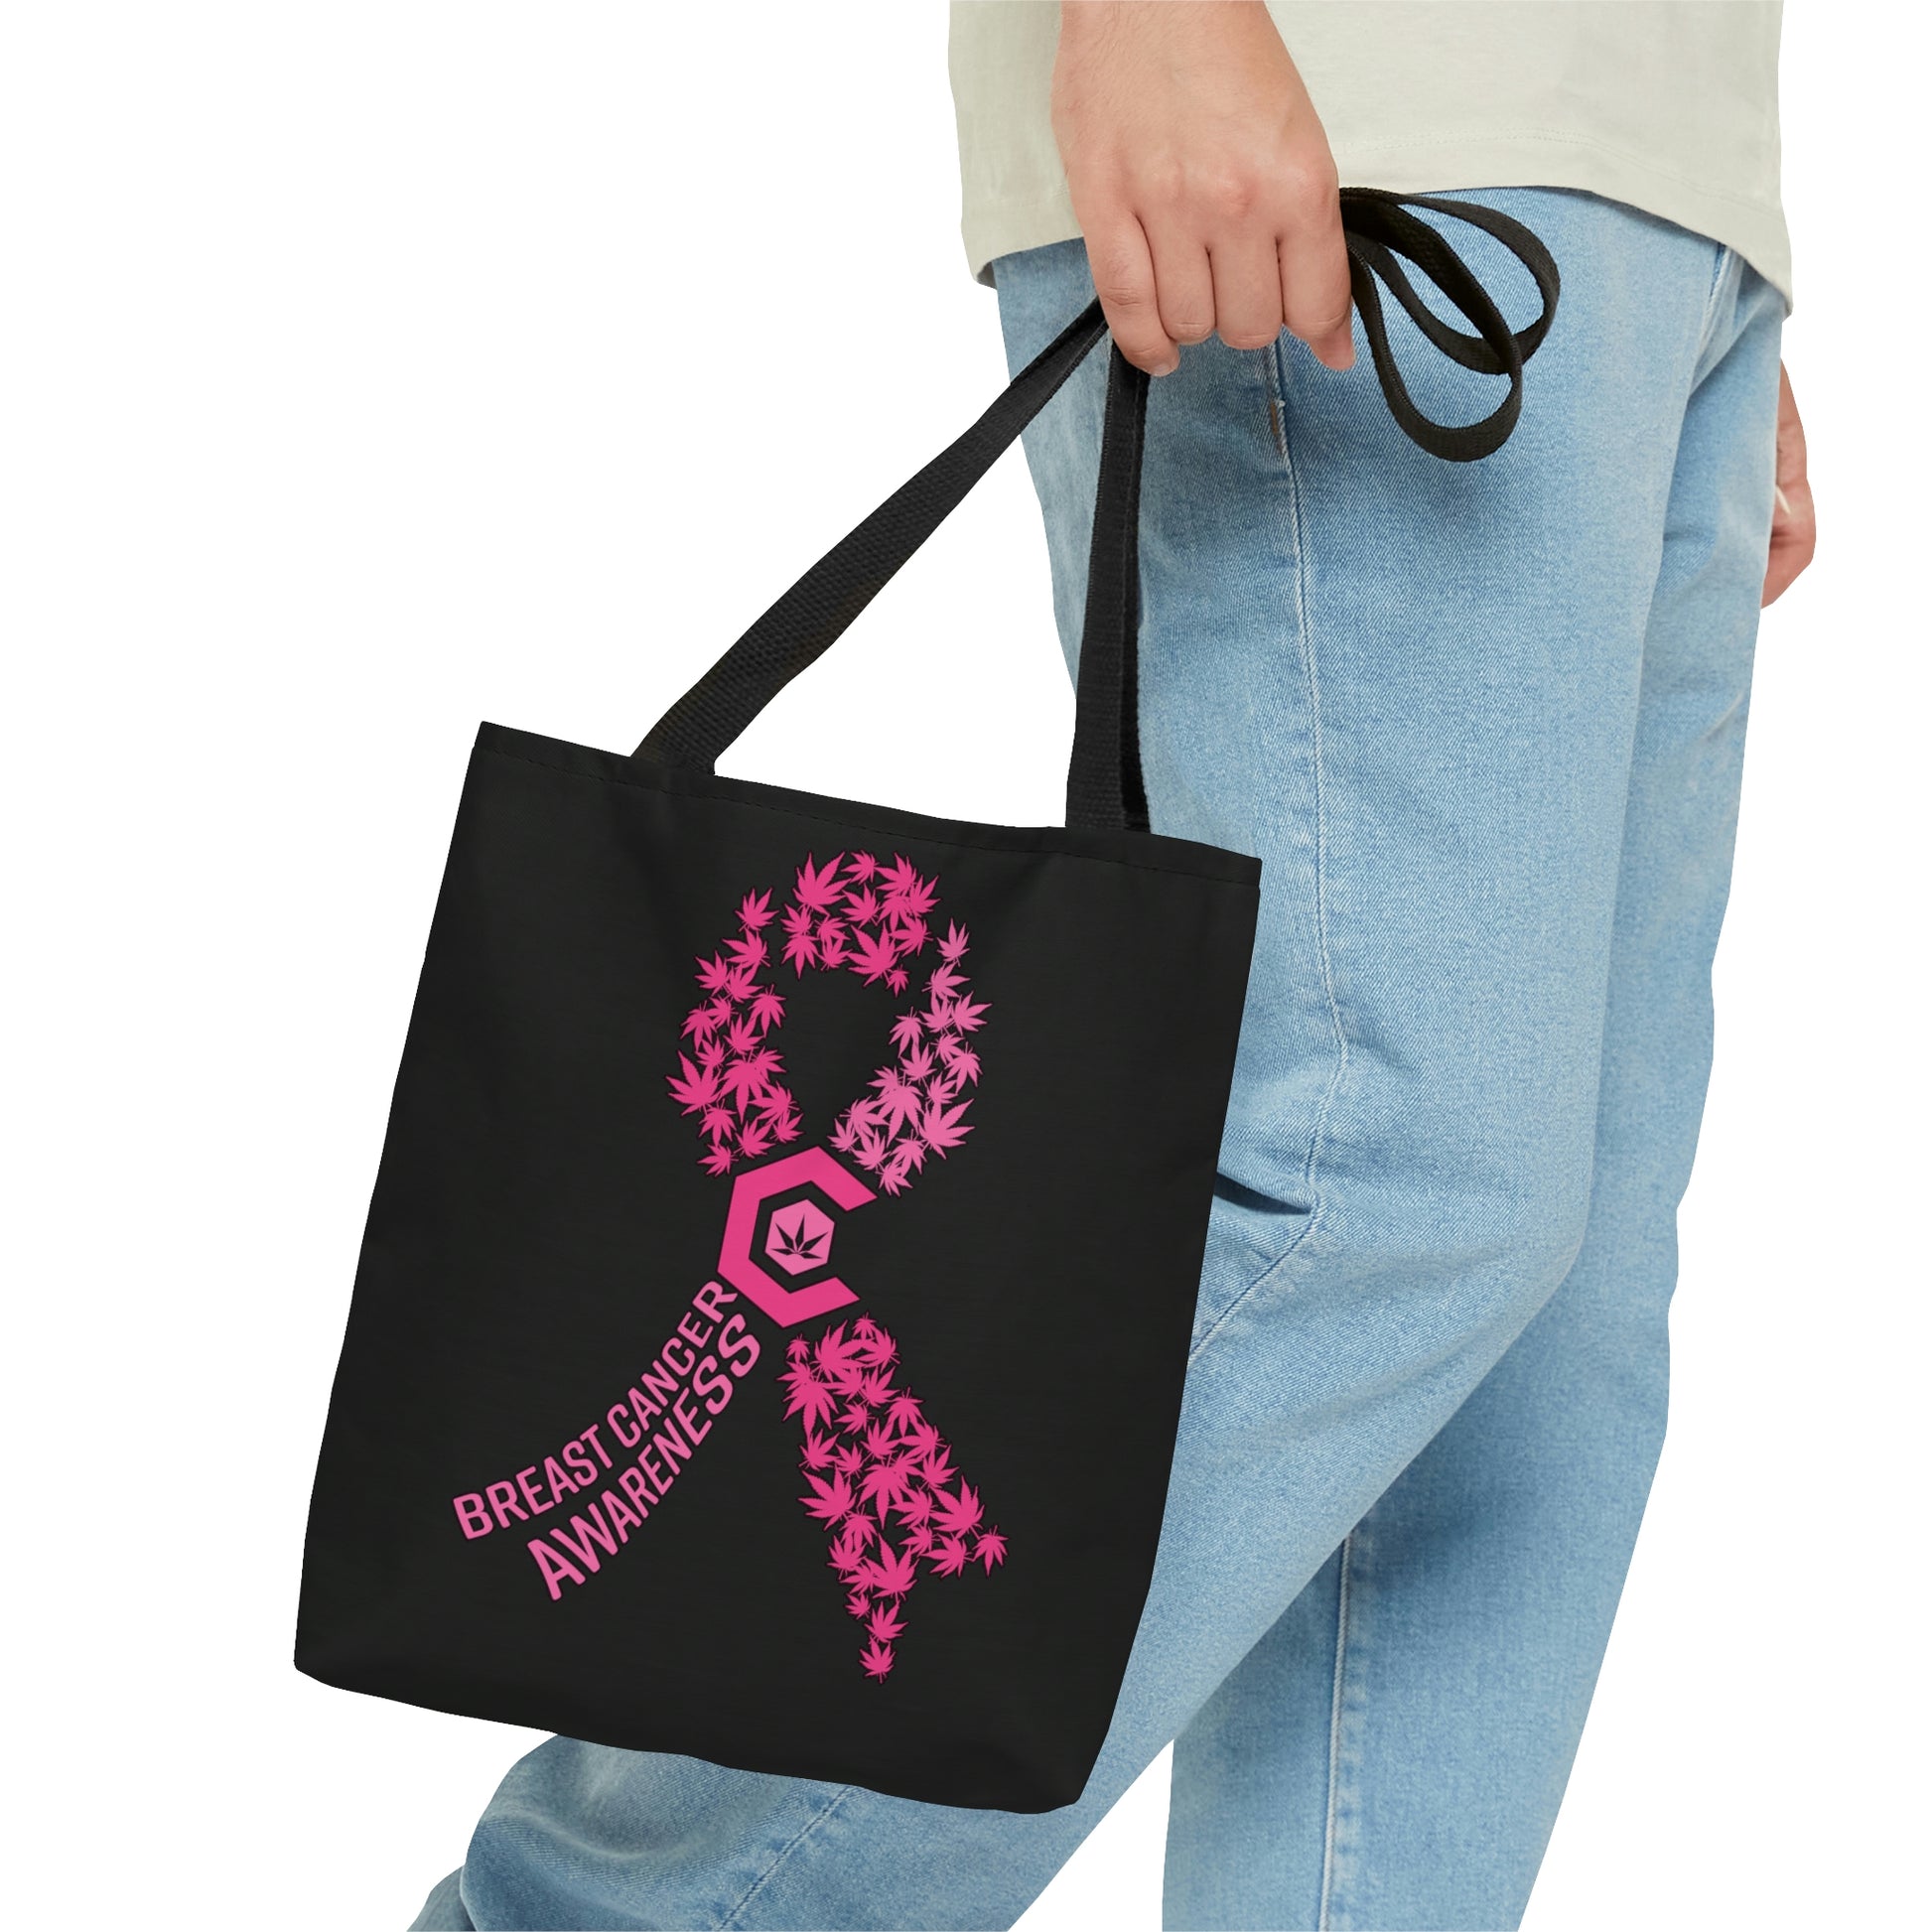 A man clutches the Breast Cancer Awareness Black Tote Bag with pink lettering and pink ribbon design  